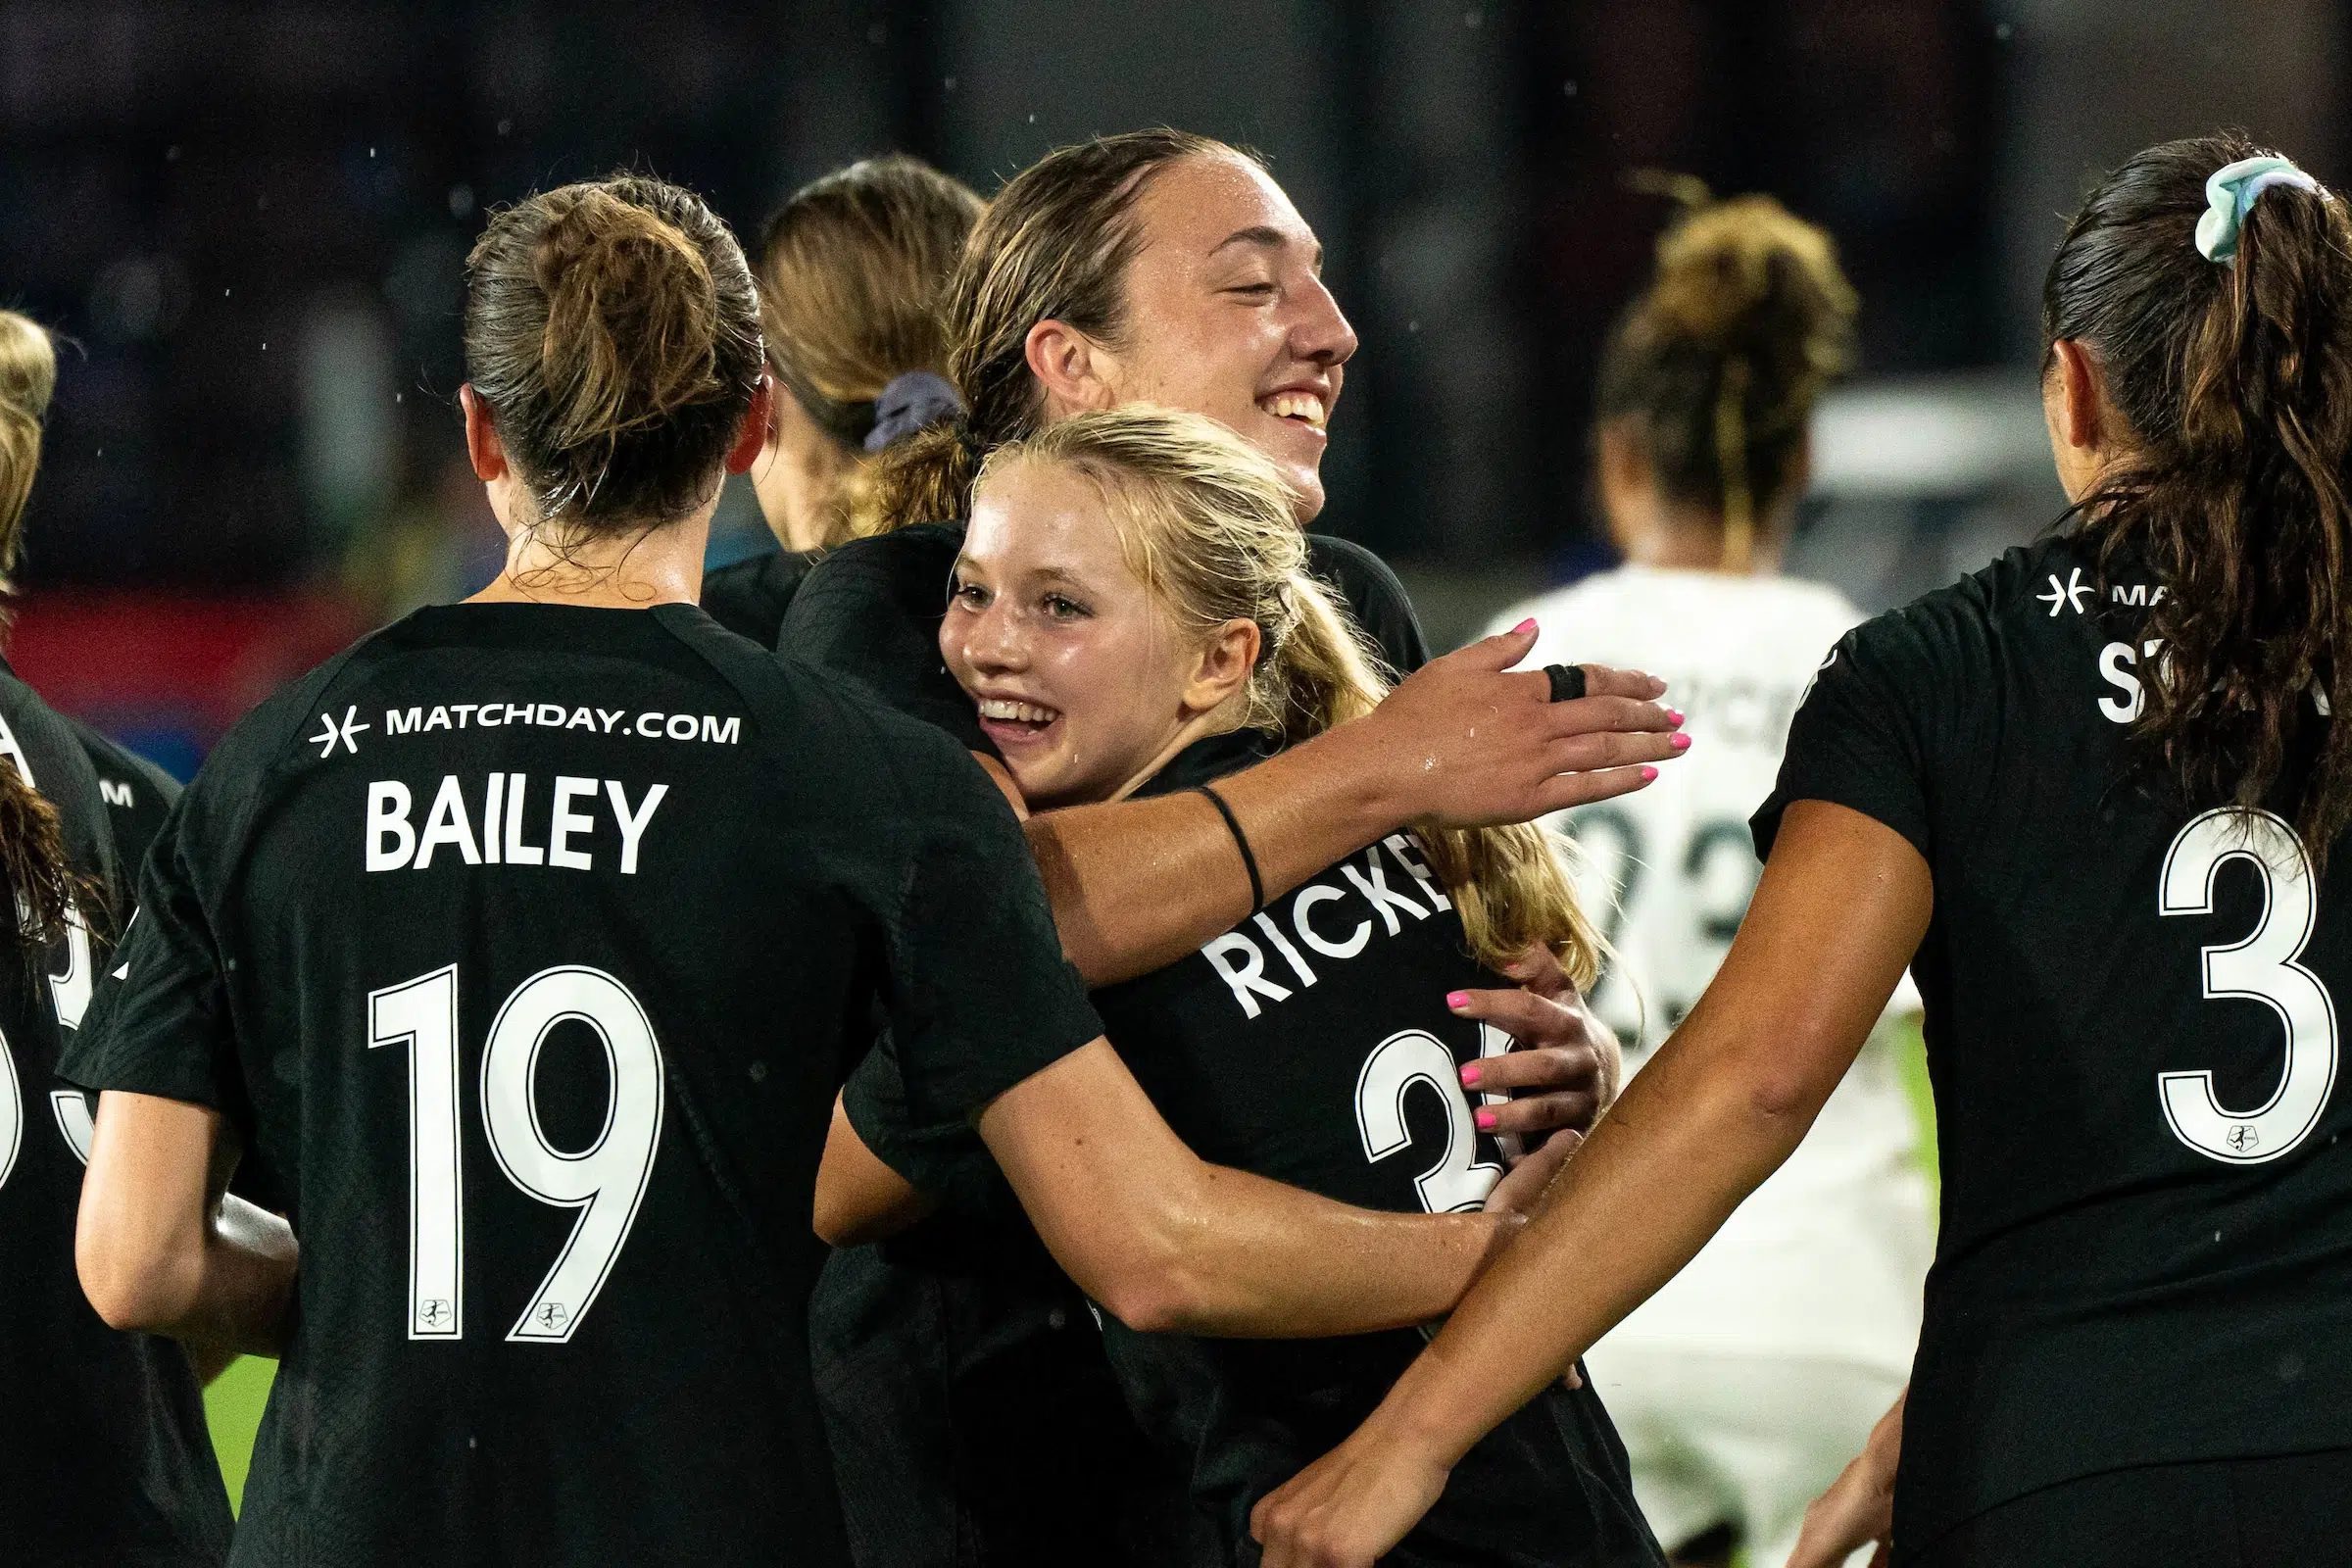 A group of soccer players in black uniforms hug Chloe Ricketts who smiles.